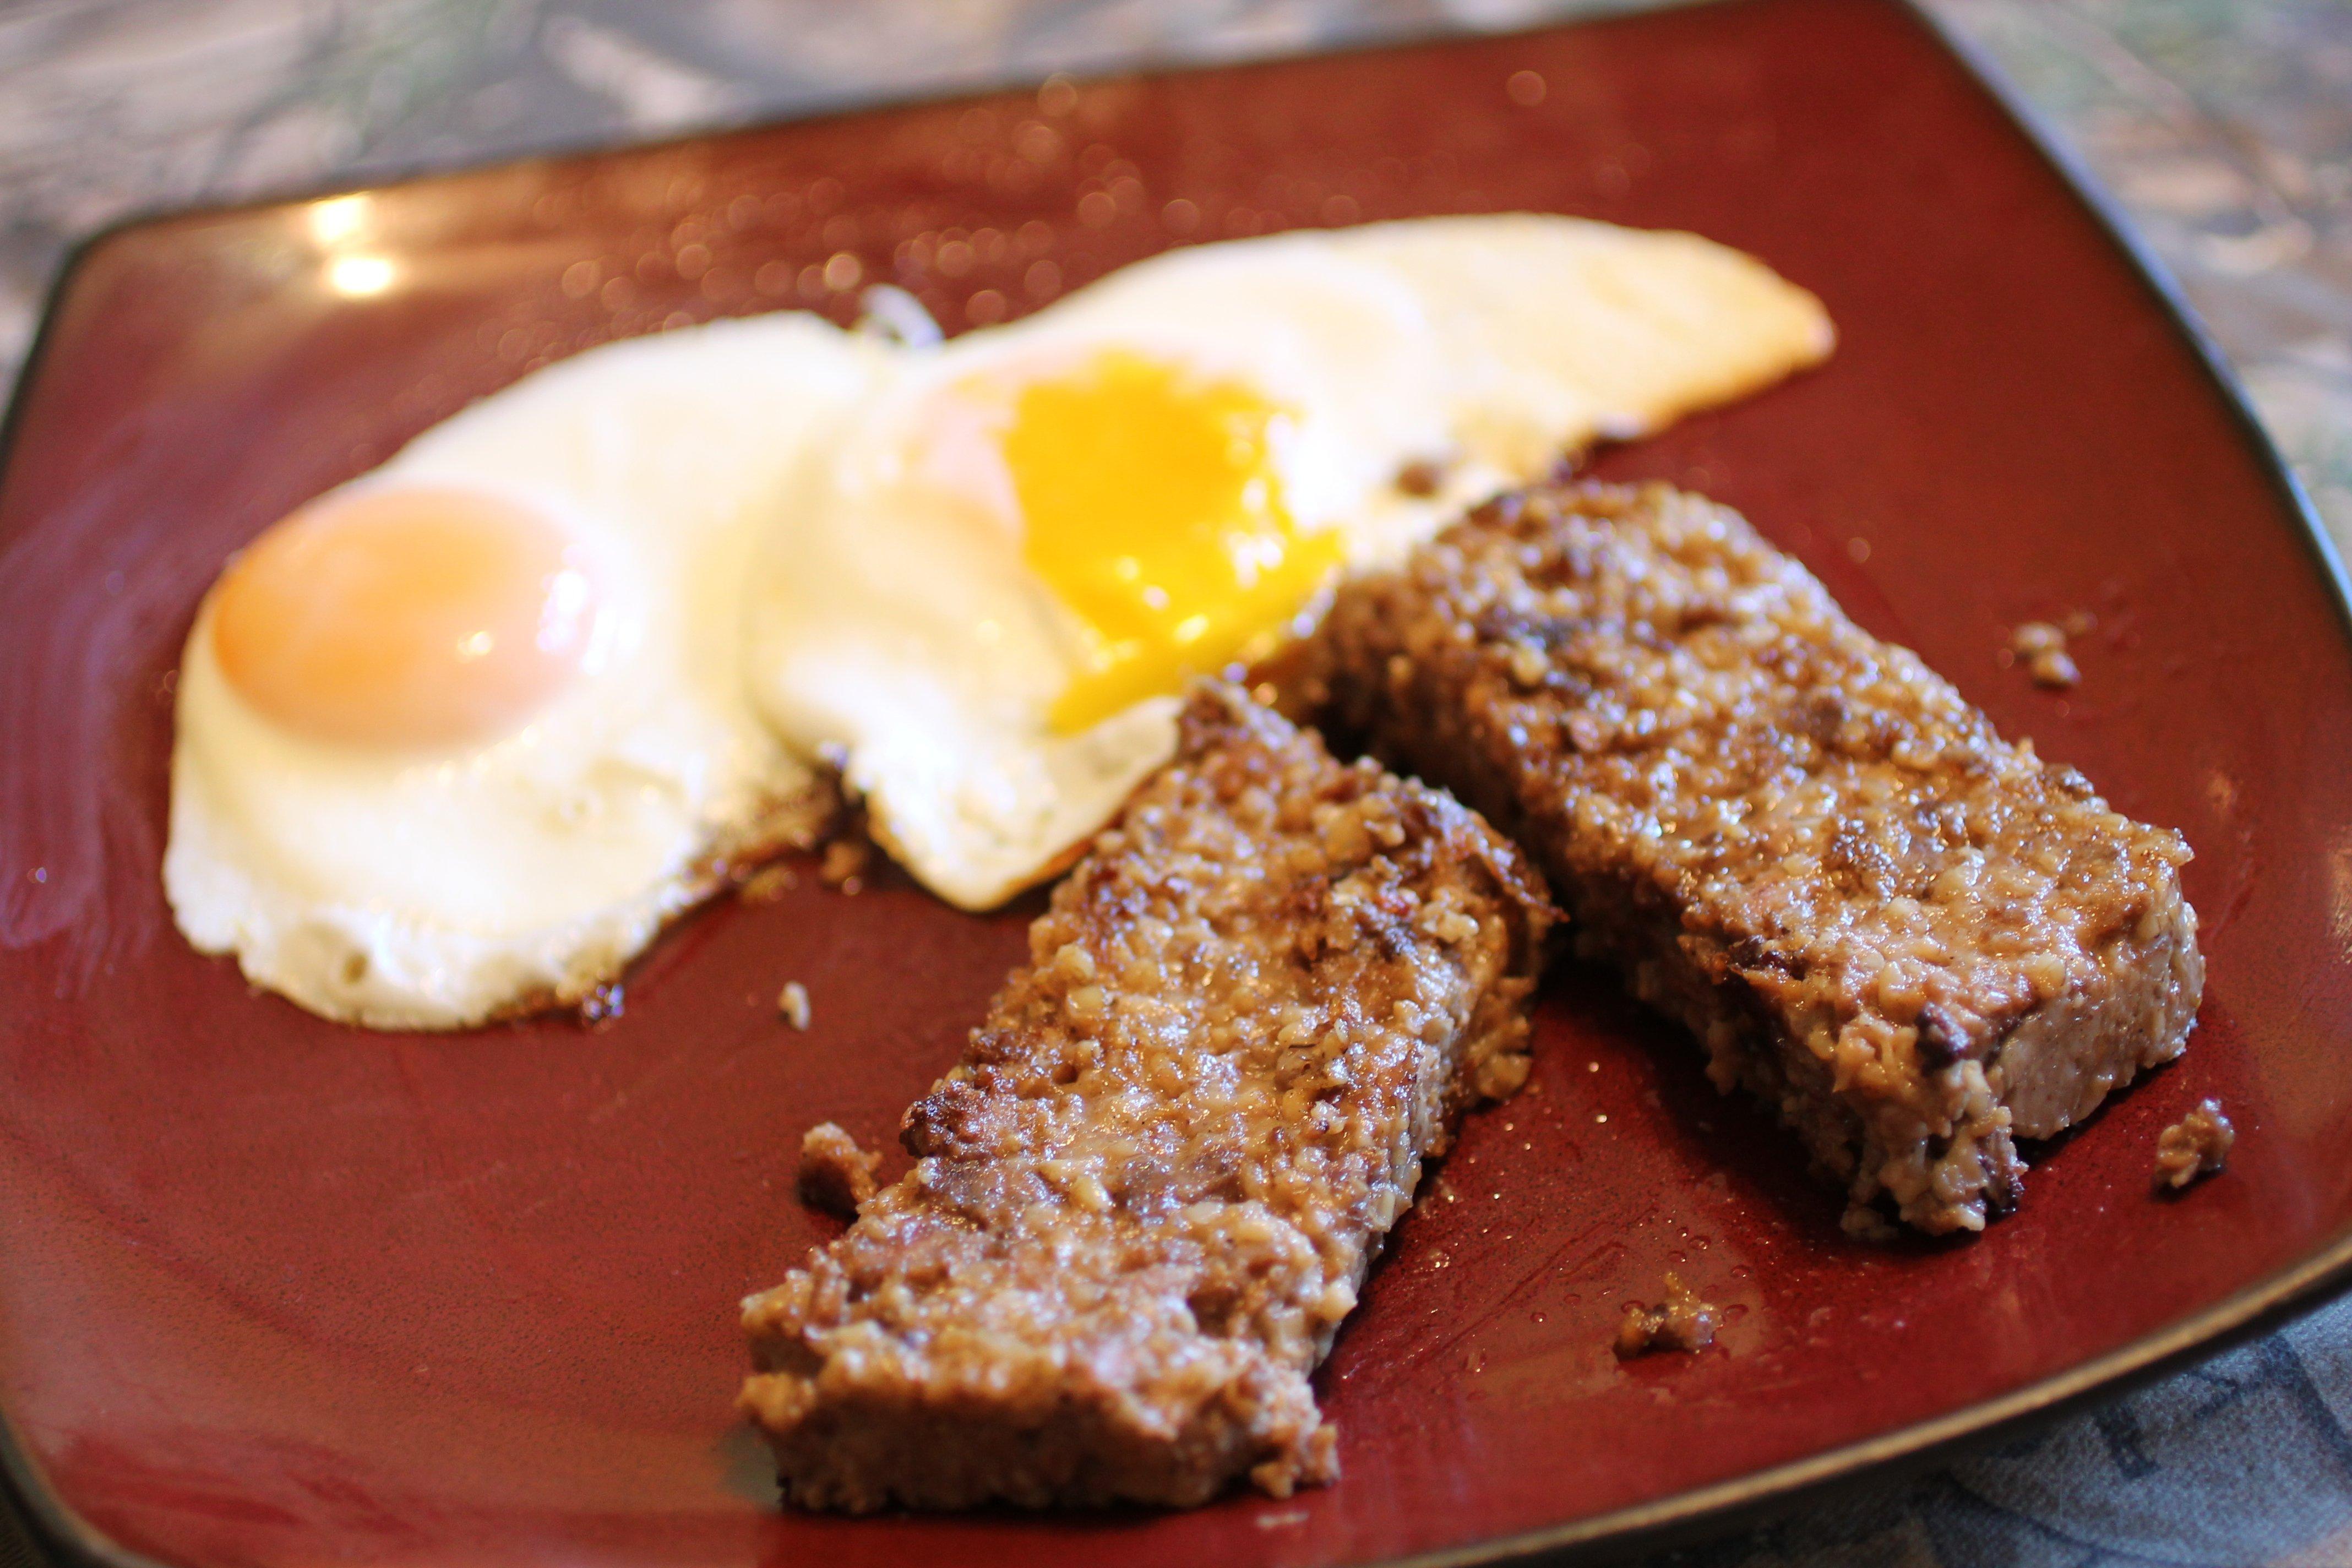 Don't let the oatmeal fool you, goetta is a savory, meaty, stick to your ribs breakfast.